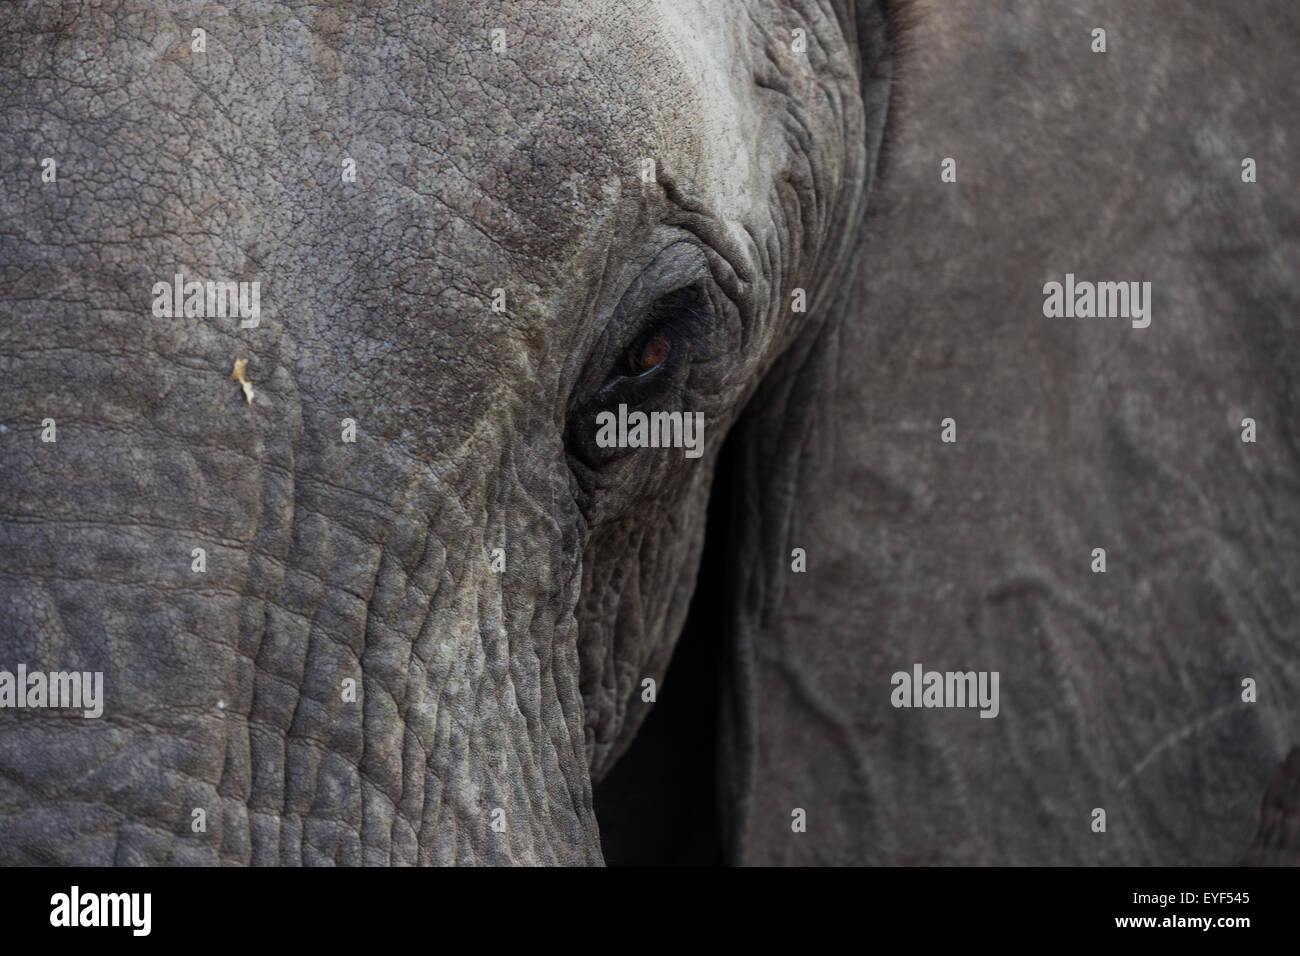 Close up of a sad looking elephant face in Kruger National Park, South Africa. Stock Photo